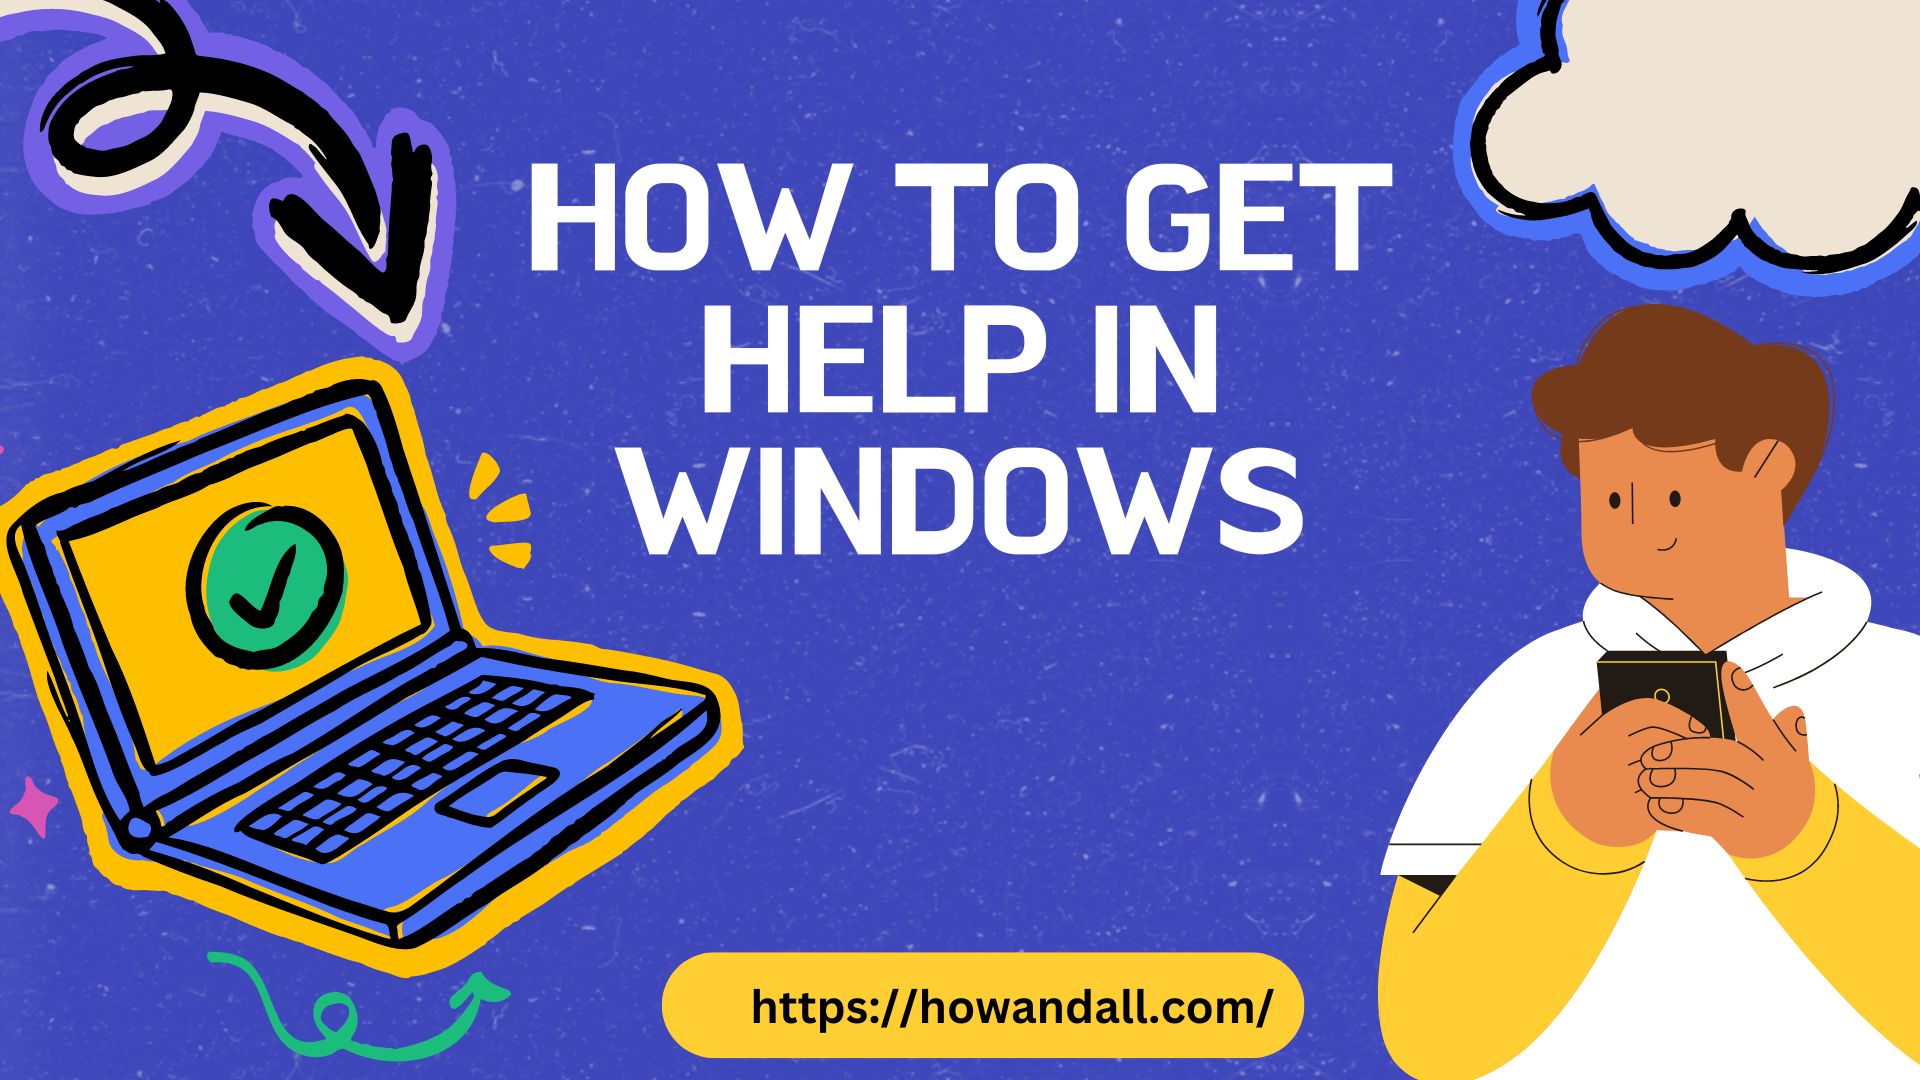 How to get help in windows